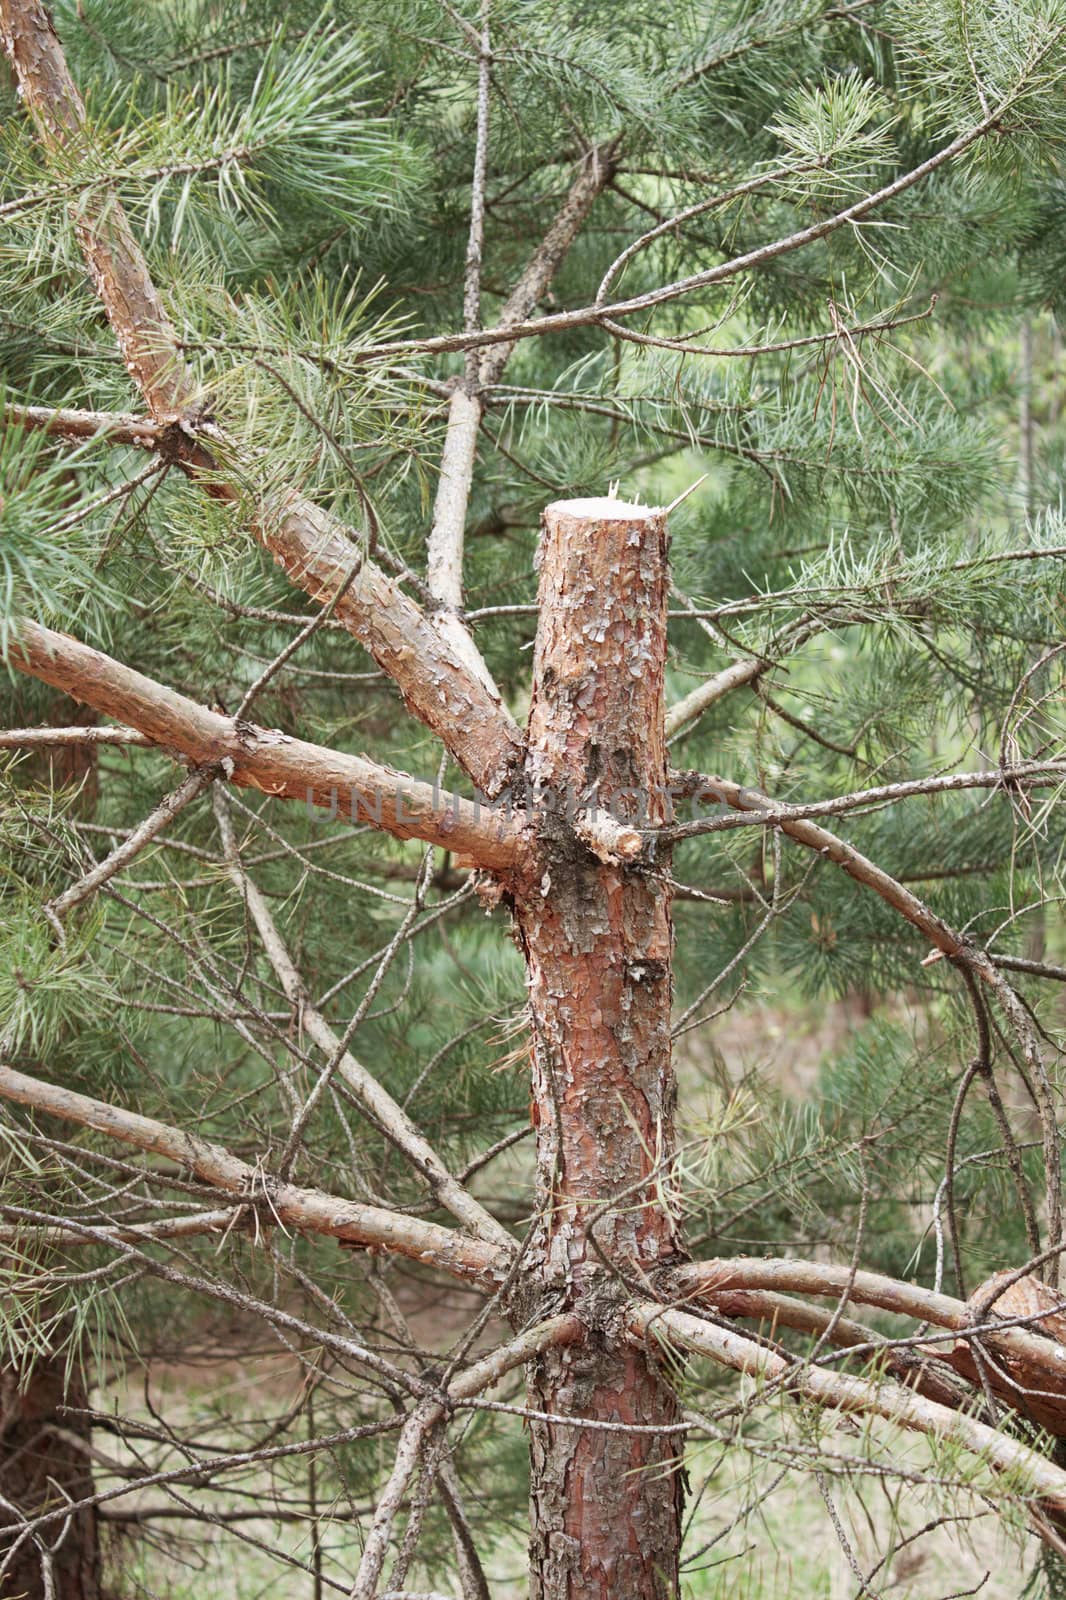 The trunk of a pine damaged by the poacher